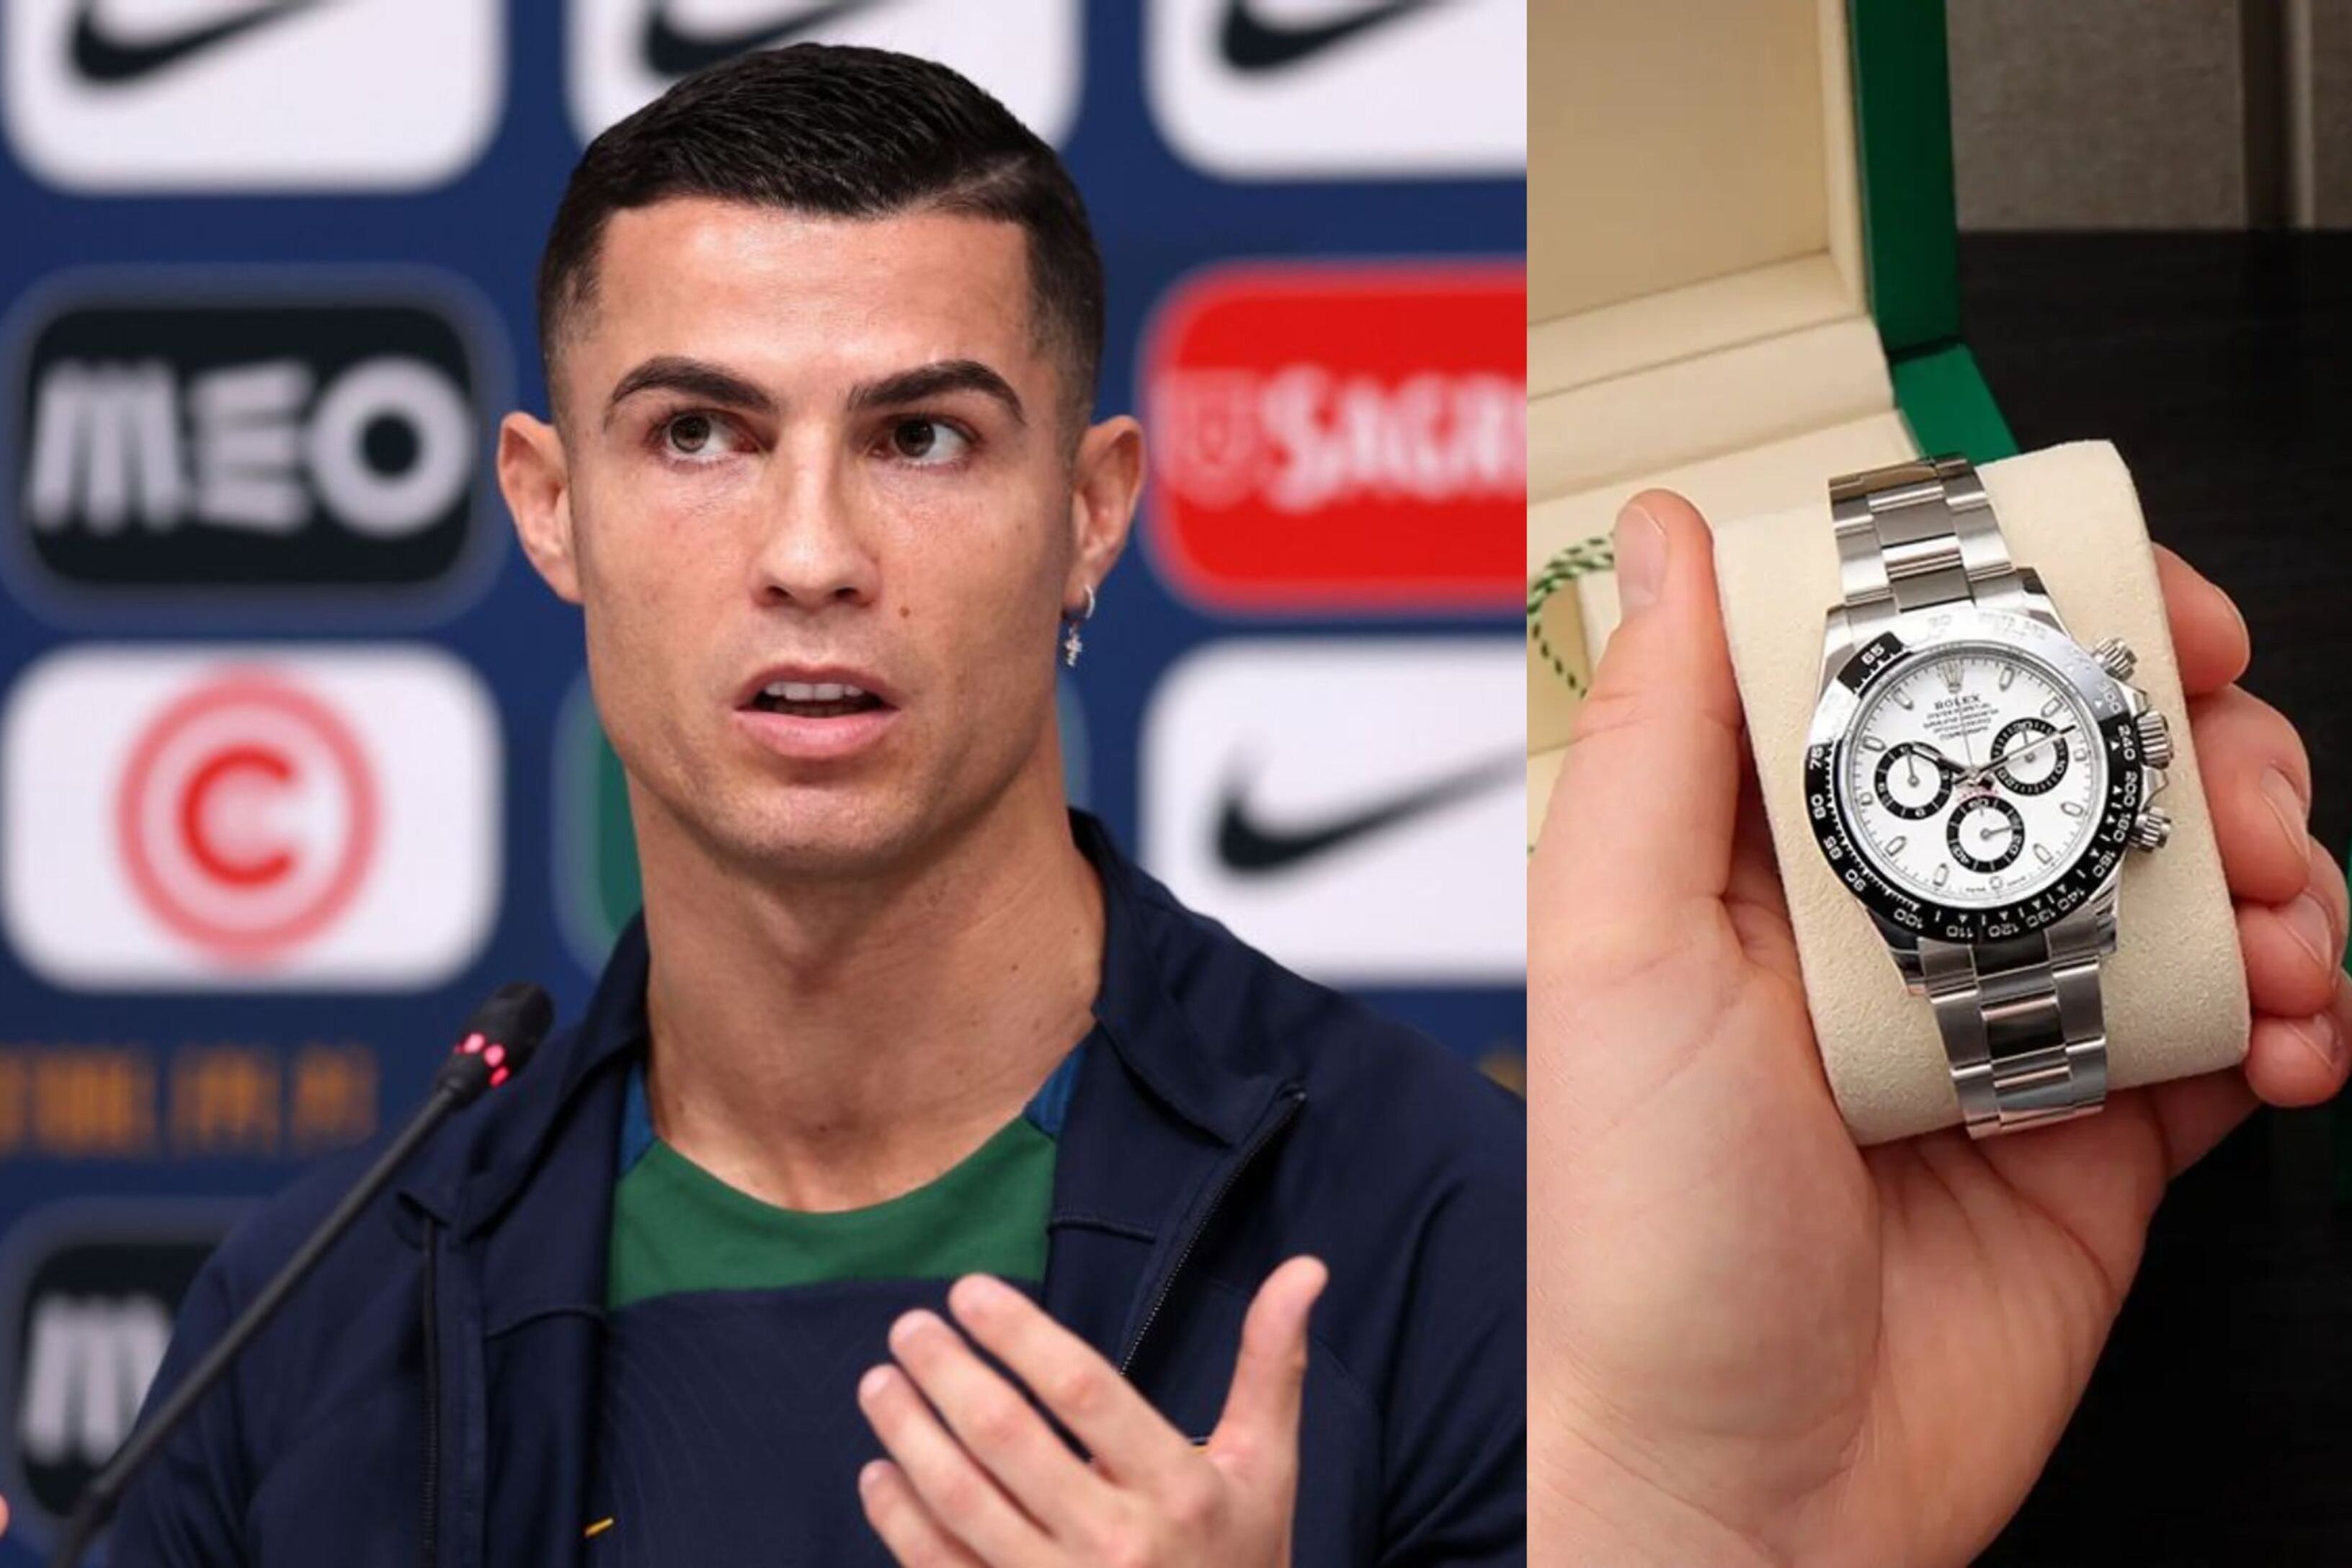 He won the UEFA Champions League, betrayed Real Madrid and now sells luxury watches for money